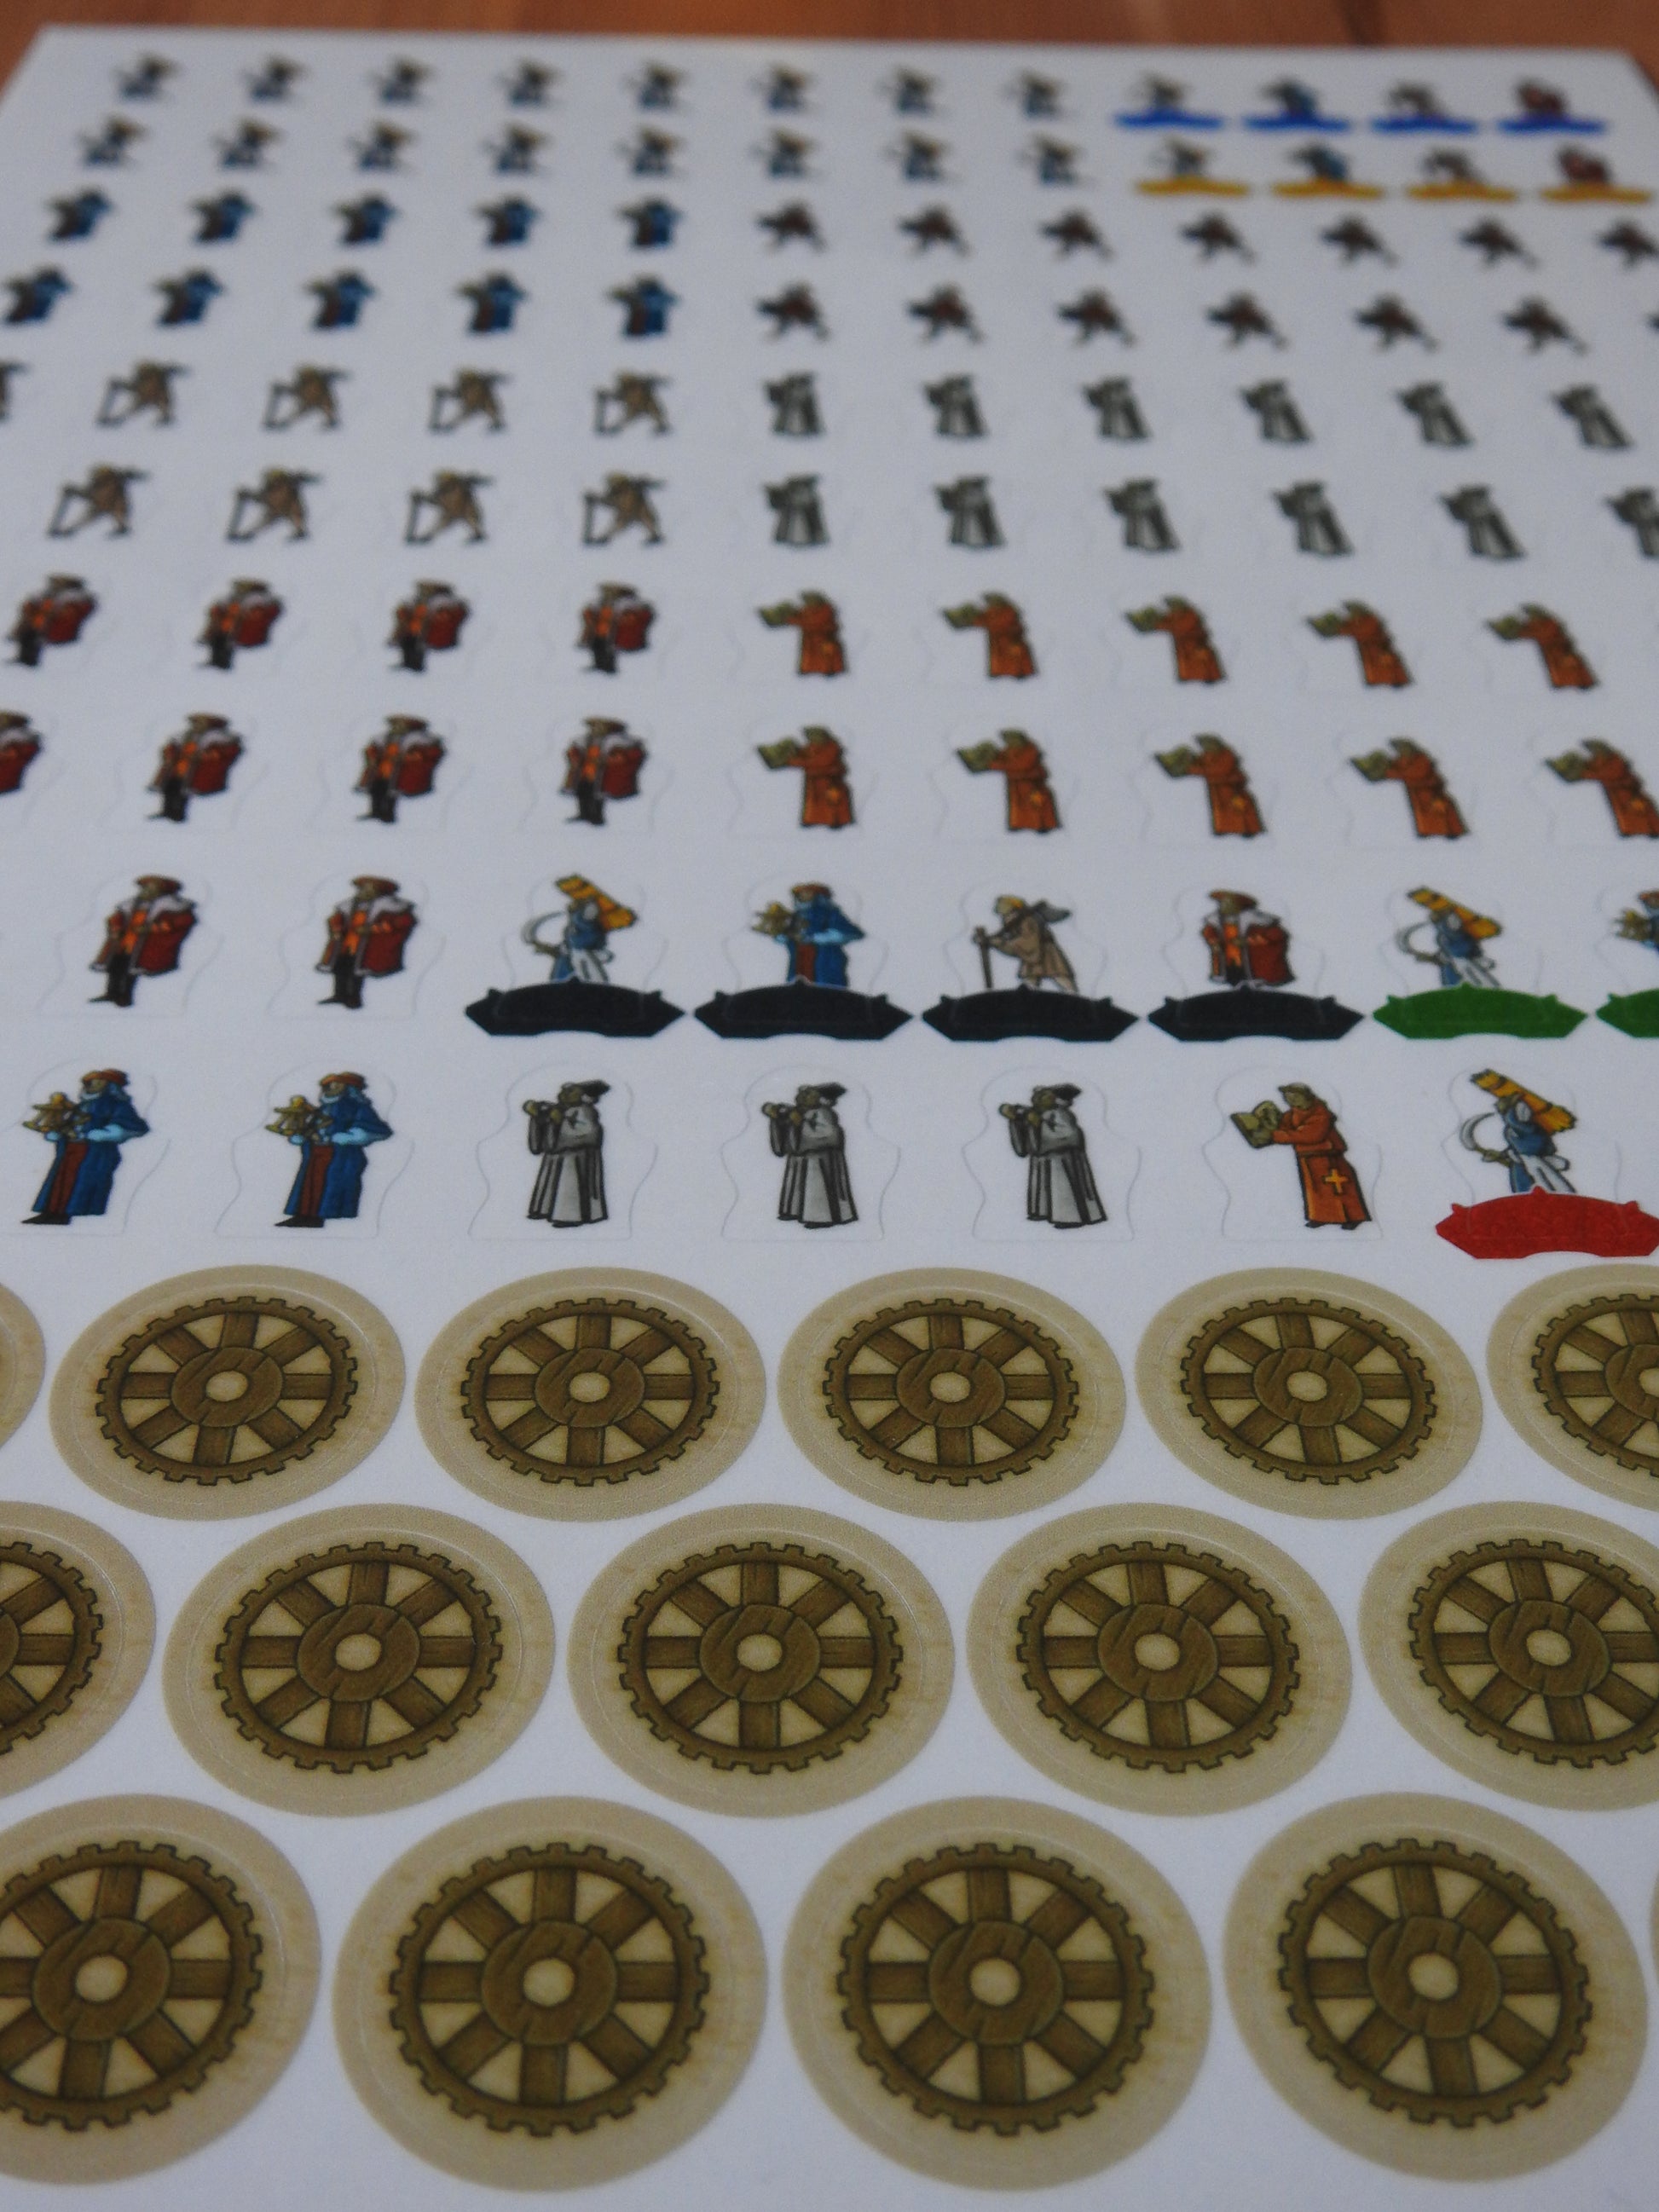 View of one of the sticker sheets, showing various characters from the game.